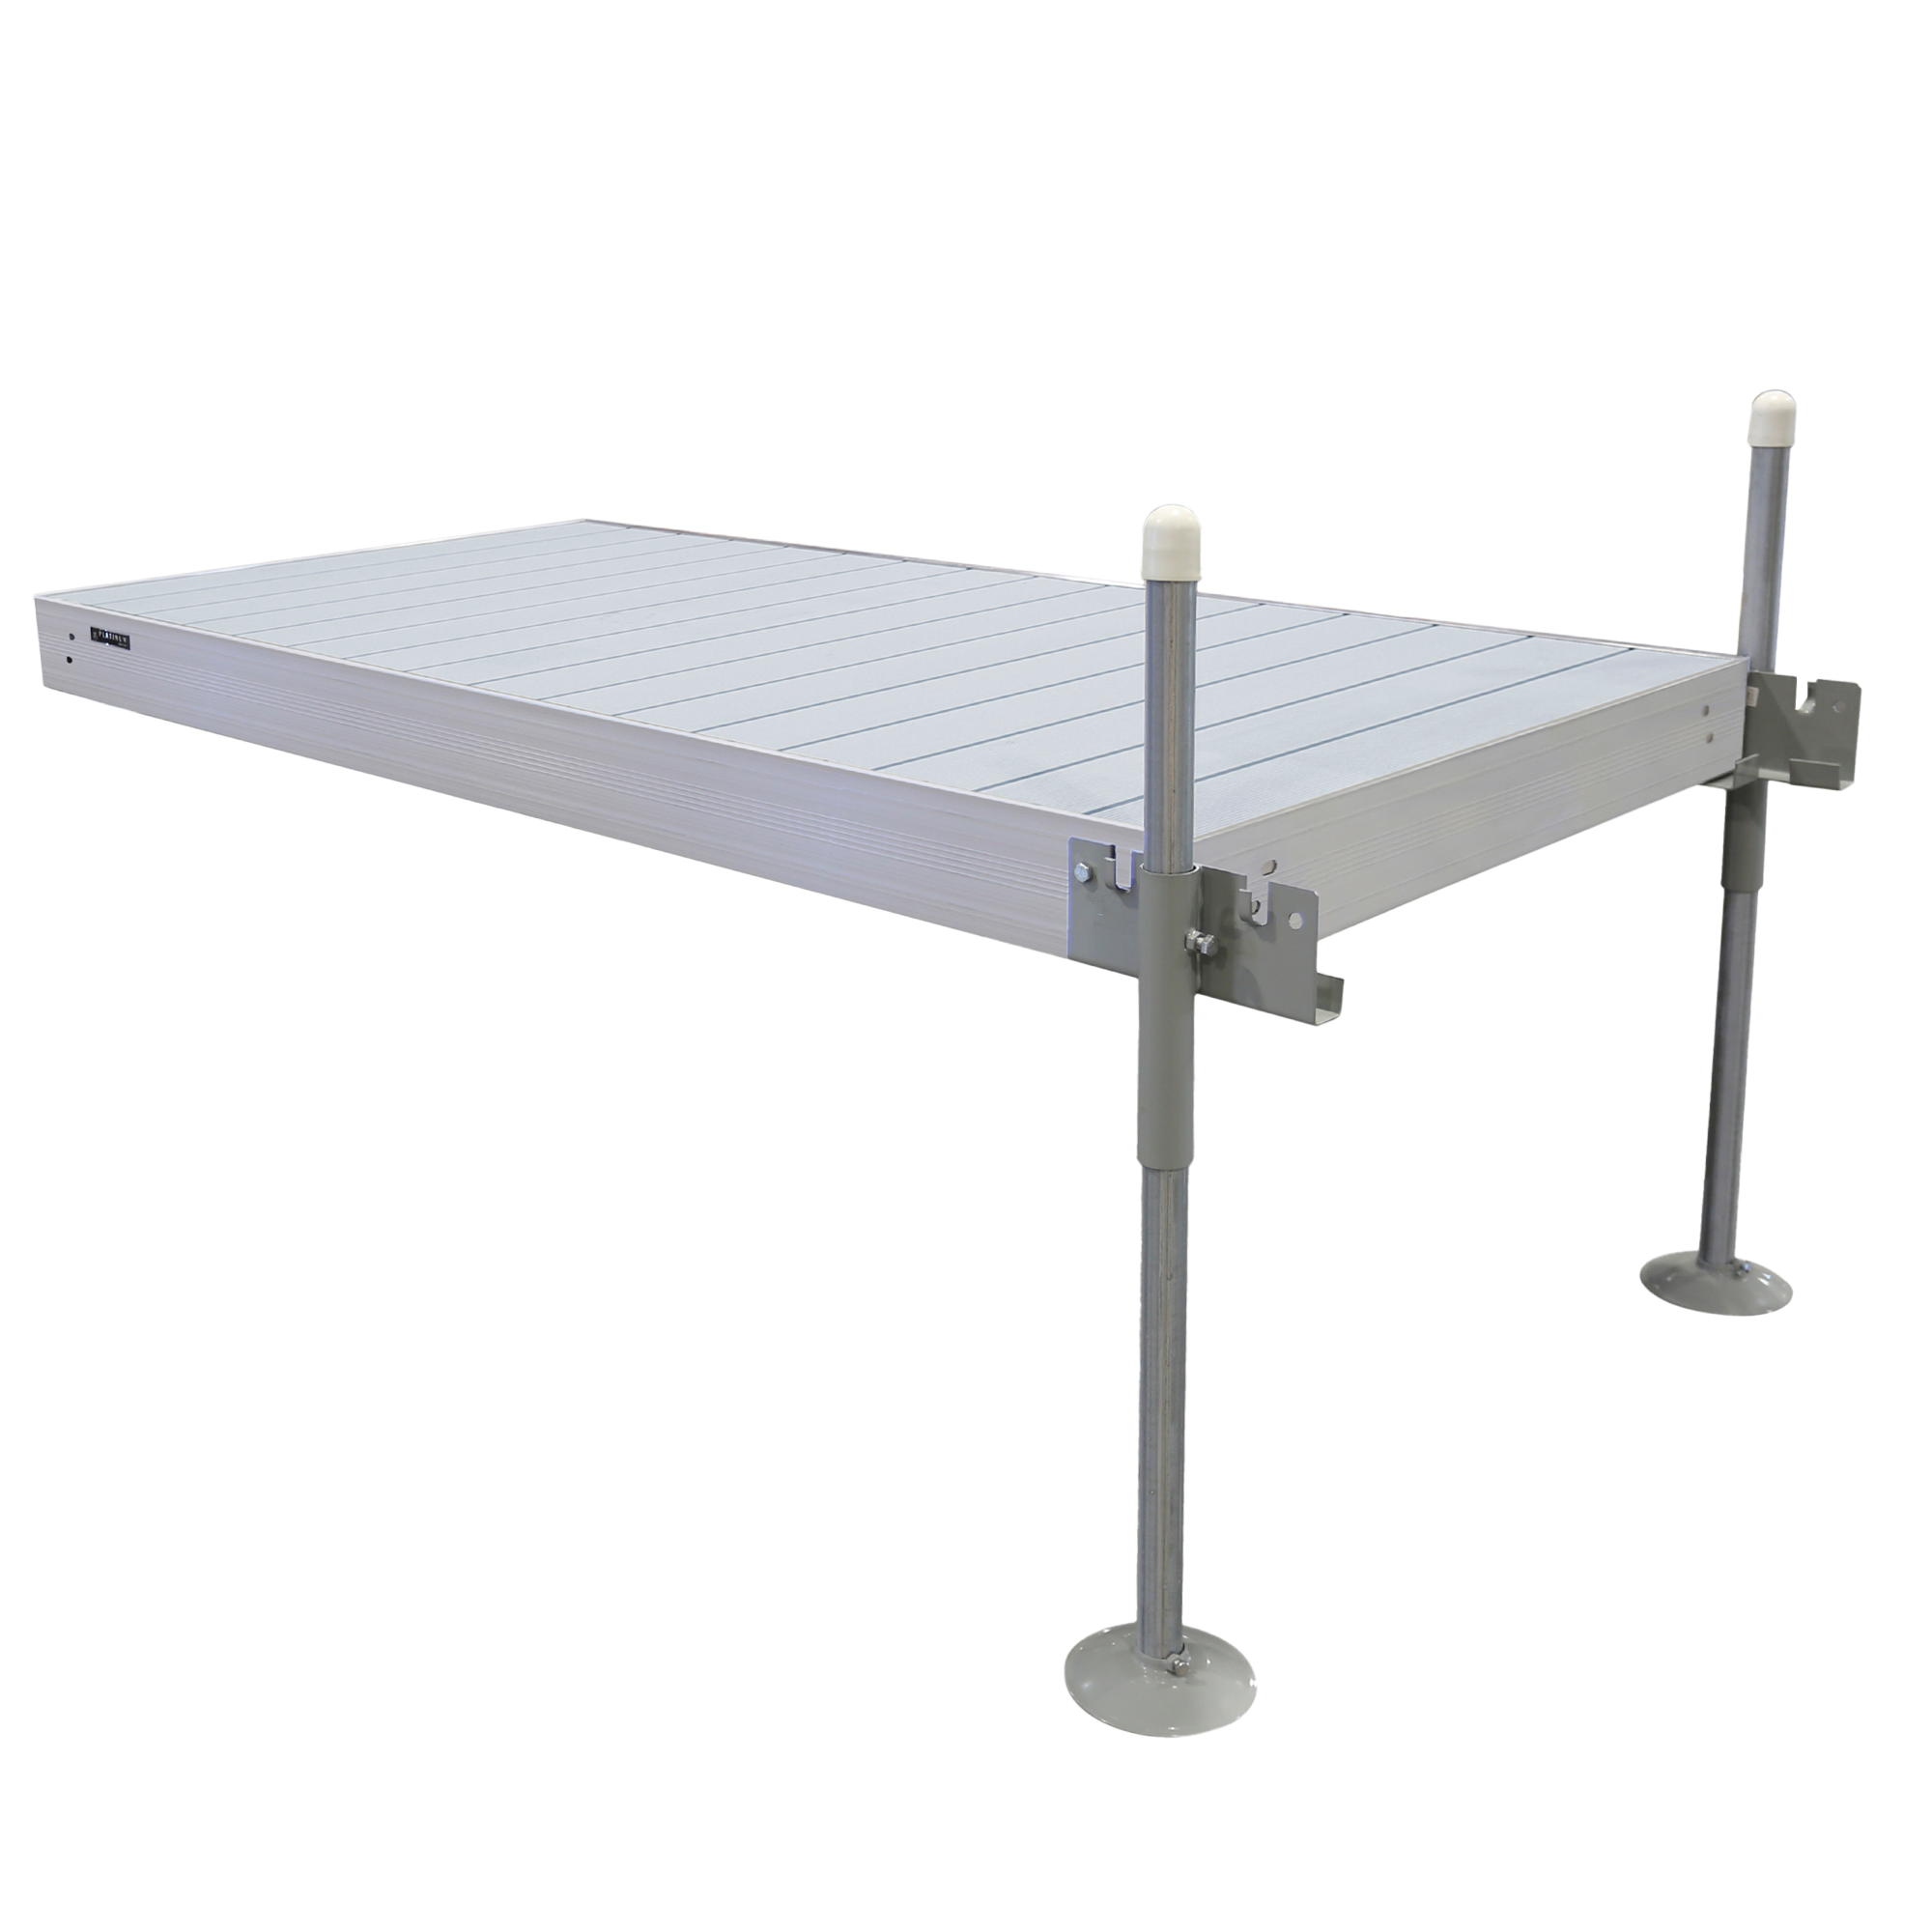 8’ Straight Boat Dock System Extender Package with Aluminum Frame and Aluminum Decking